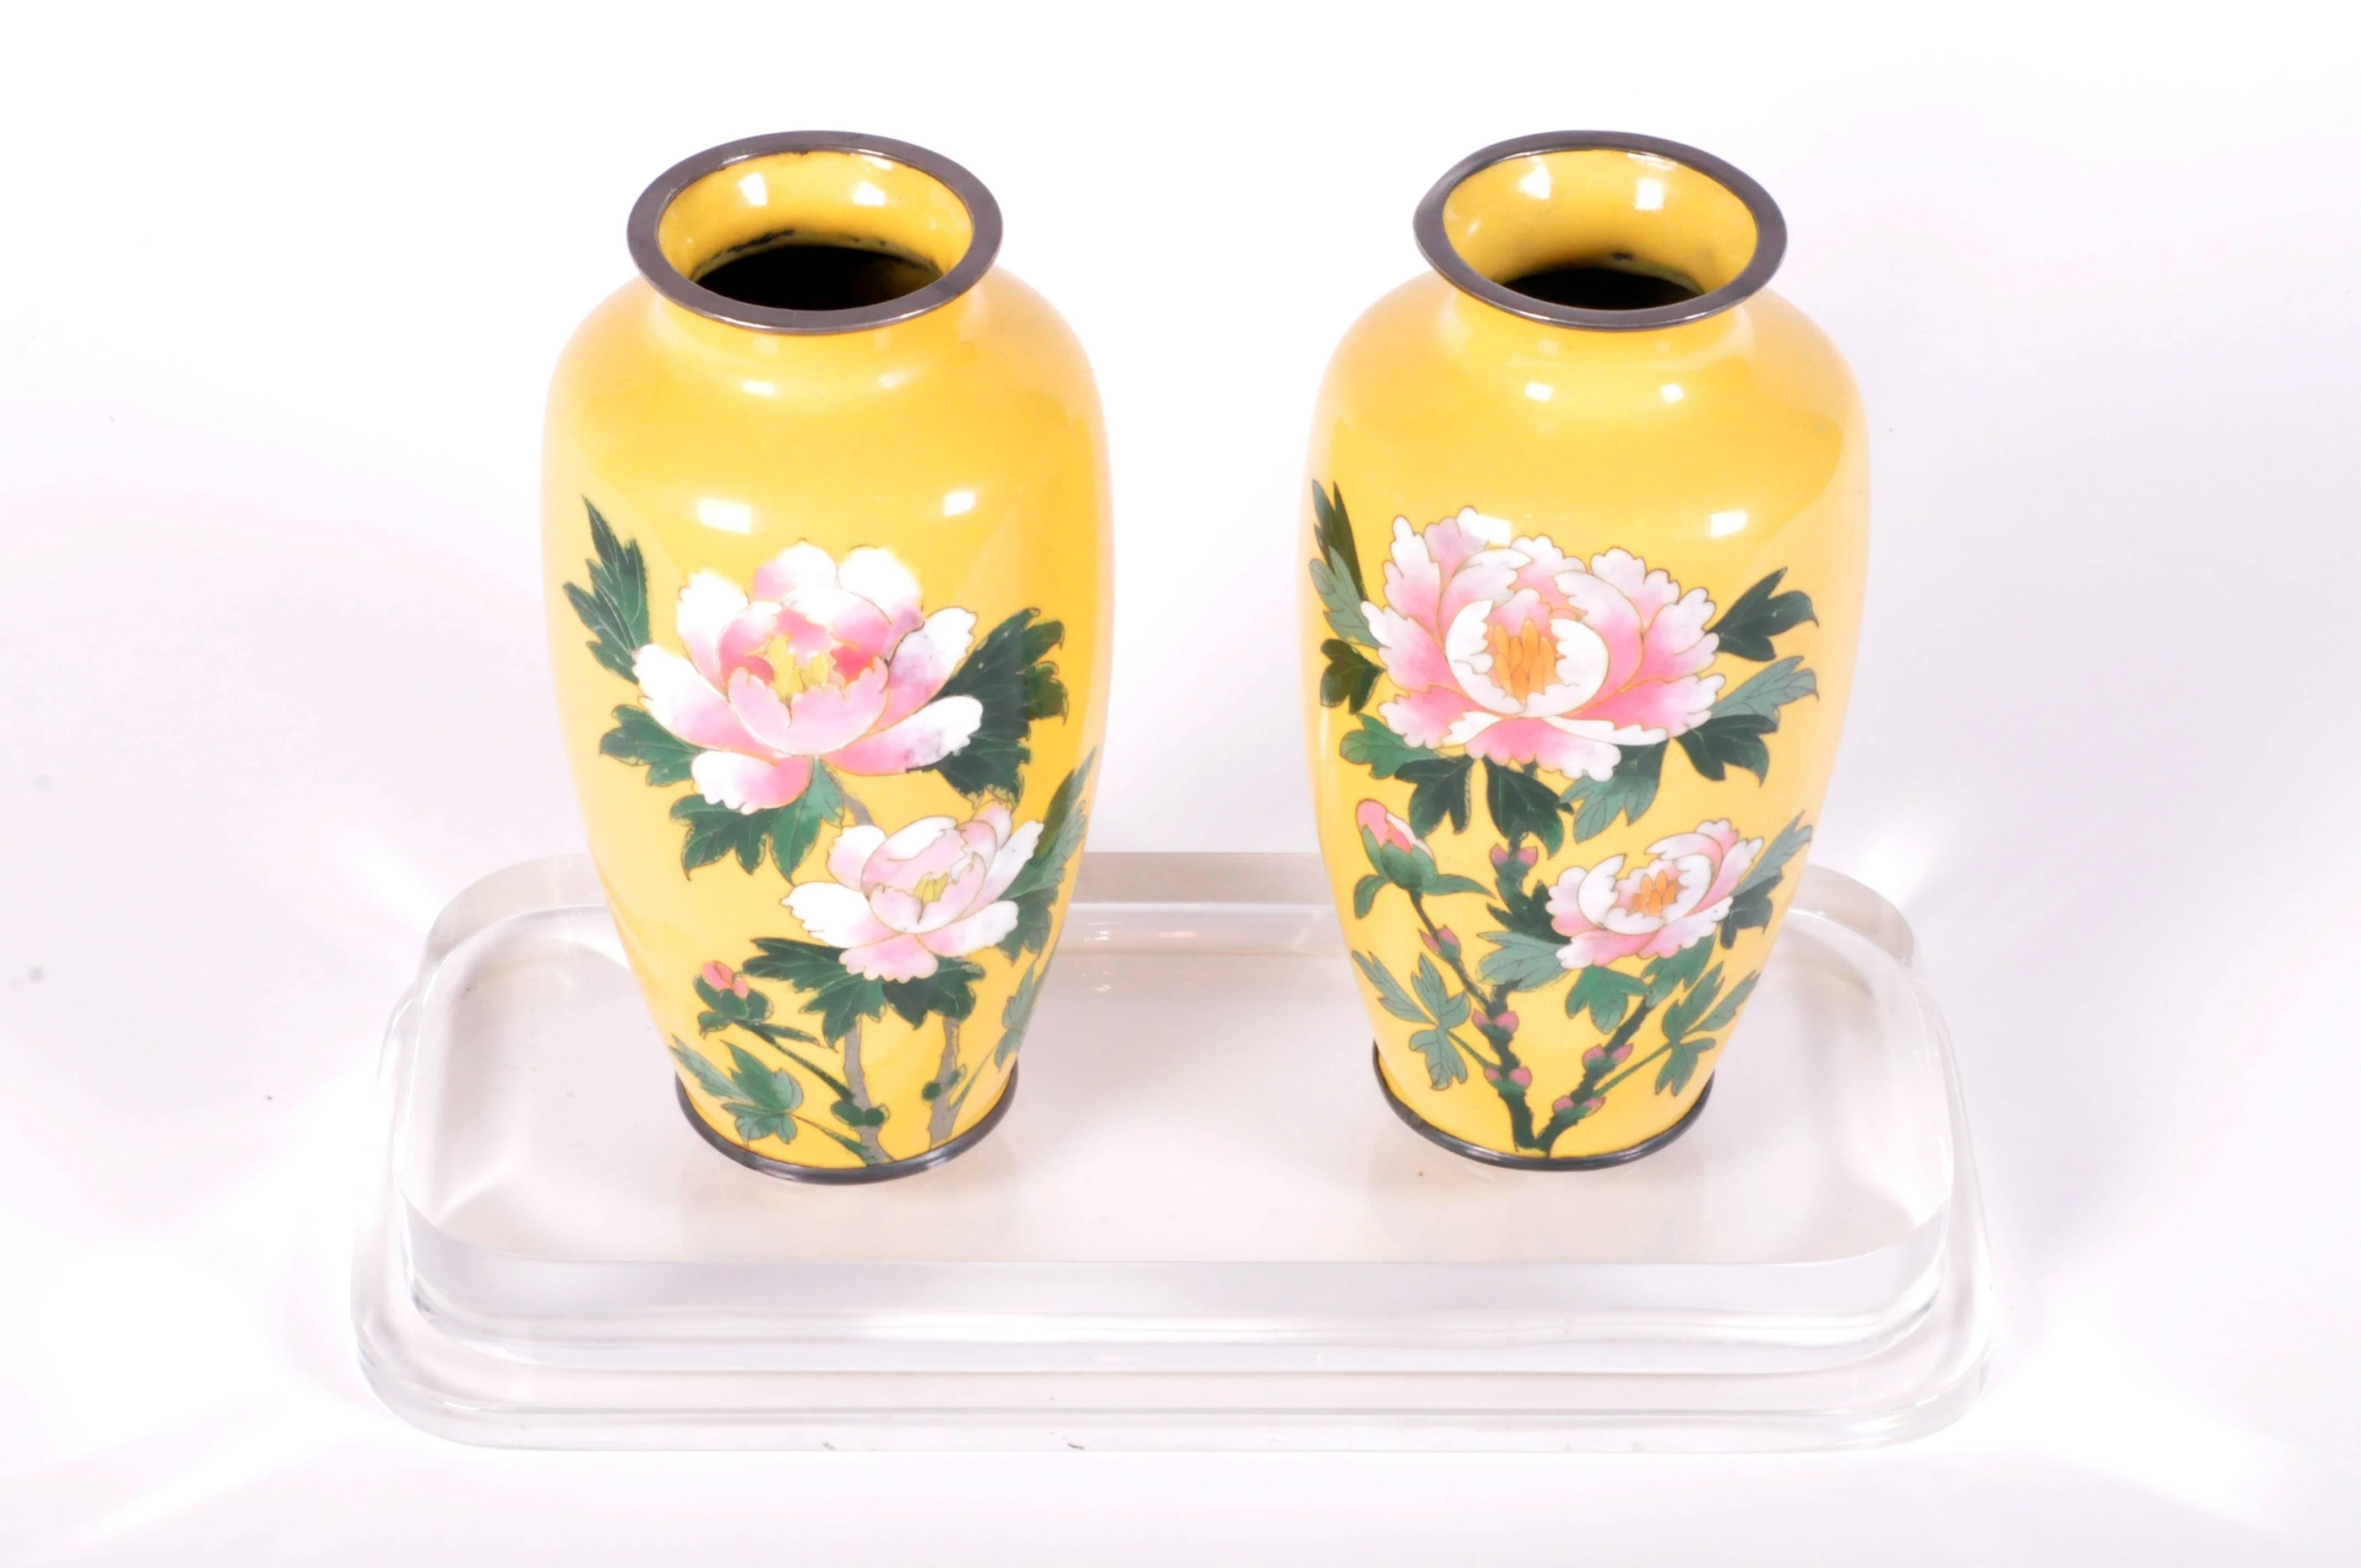 This pair of Japanese cloisonné vases are made from ceramic circa 1940 and they feature peony motifs.